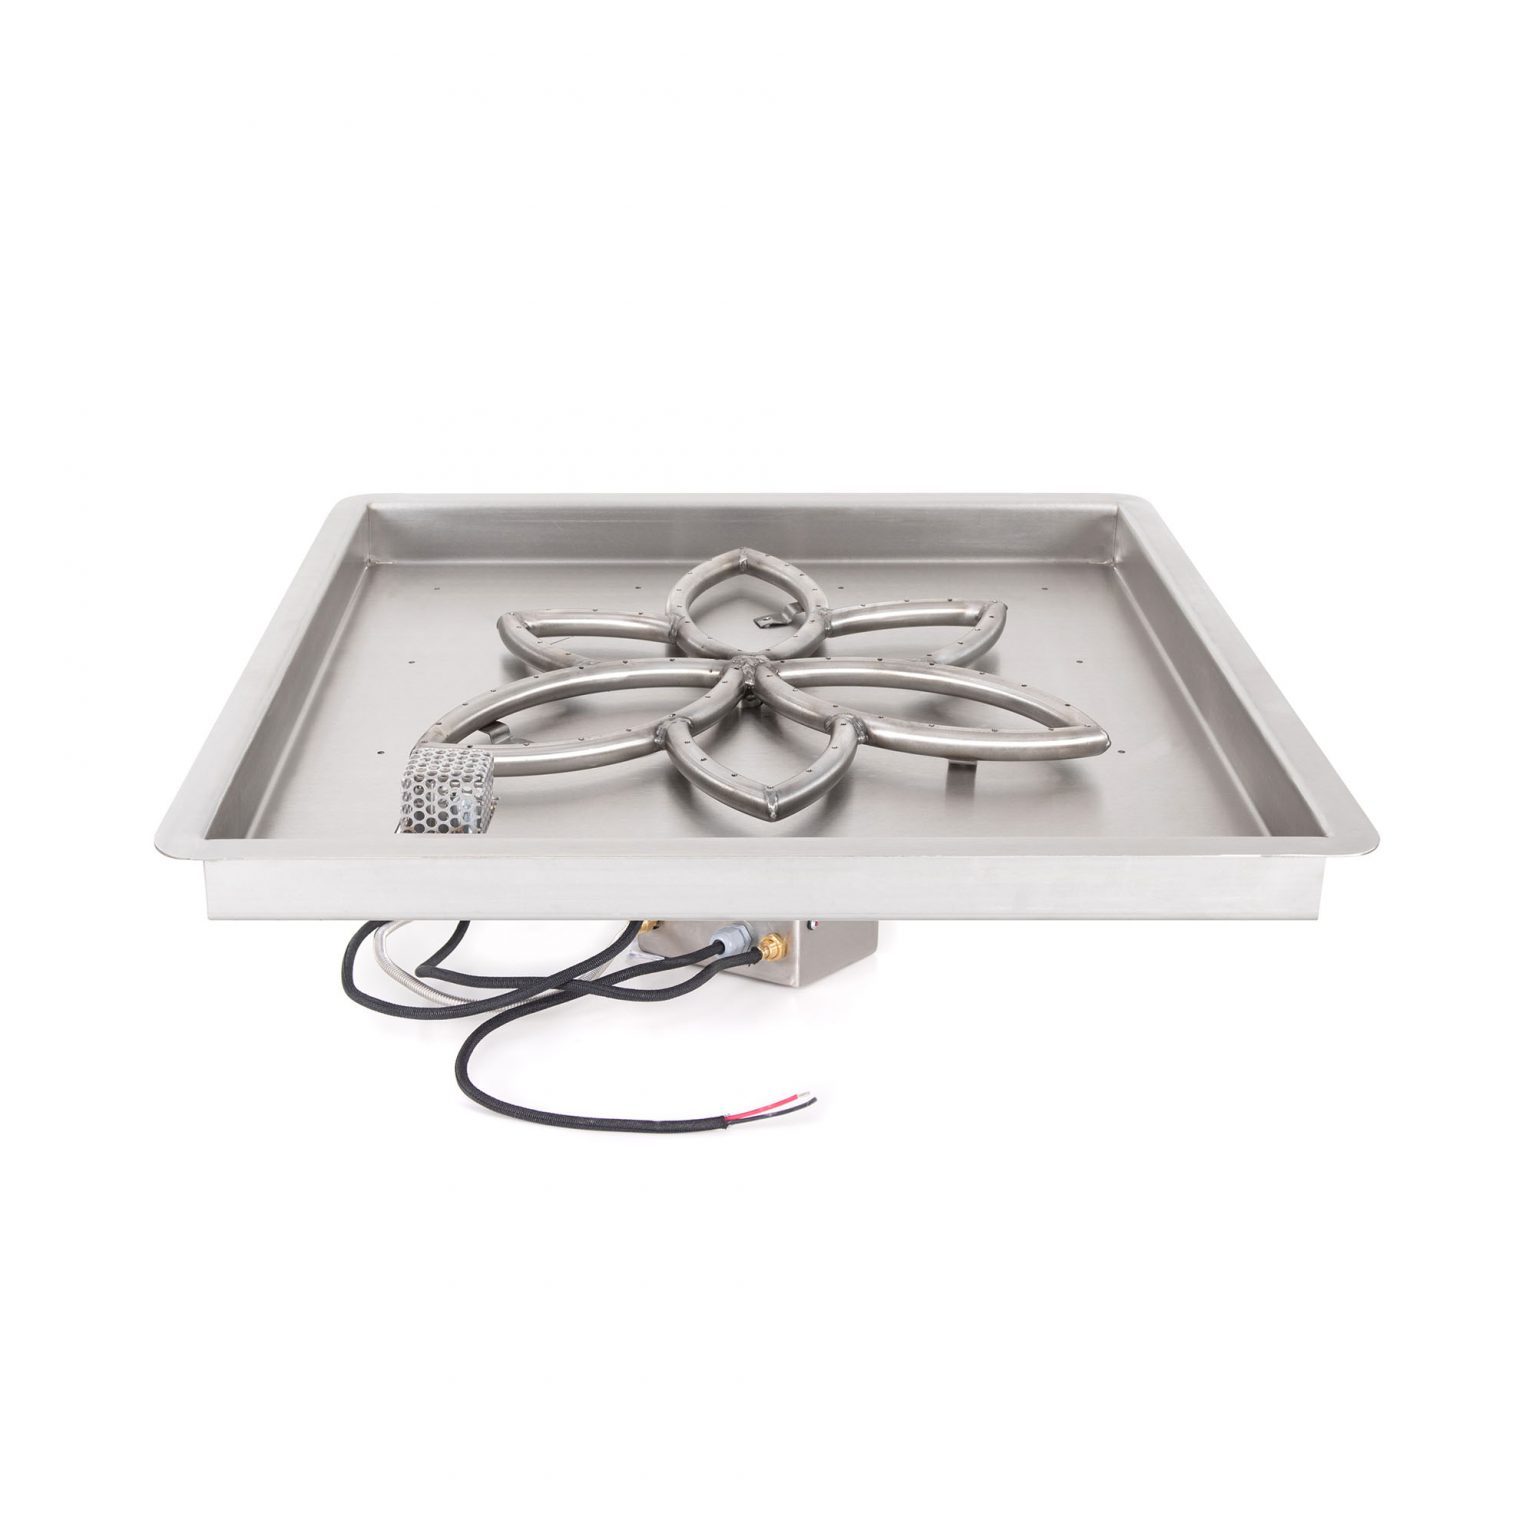 TOP Fires Square Drop-In Pan & Lotus Burner in Stainless Steel with Electronic Ignition Kit by The Outdoor Plus - Majestic Fountains